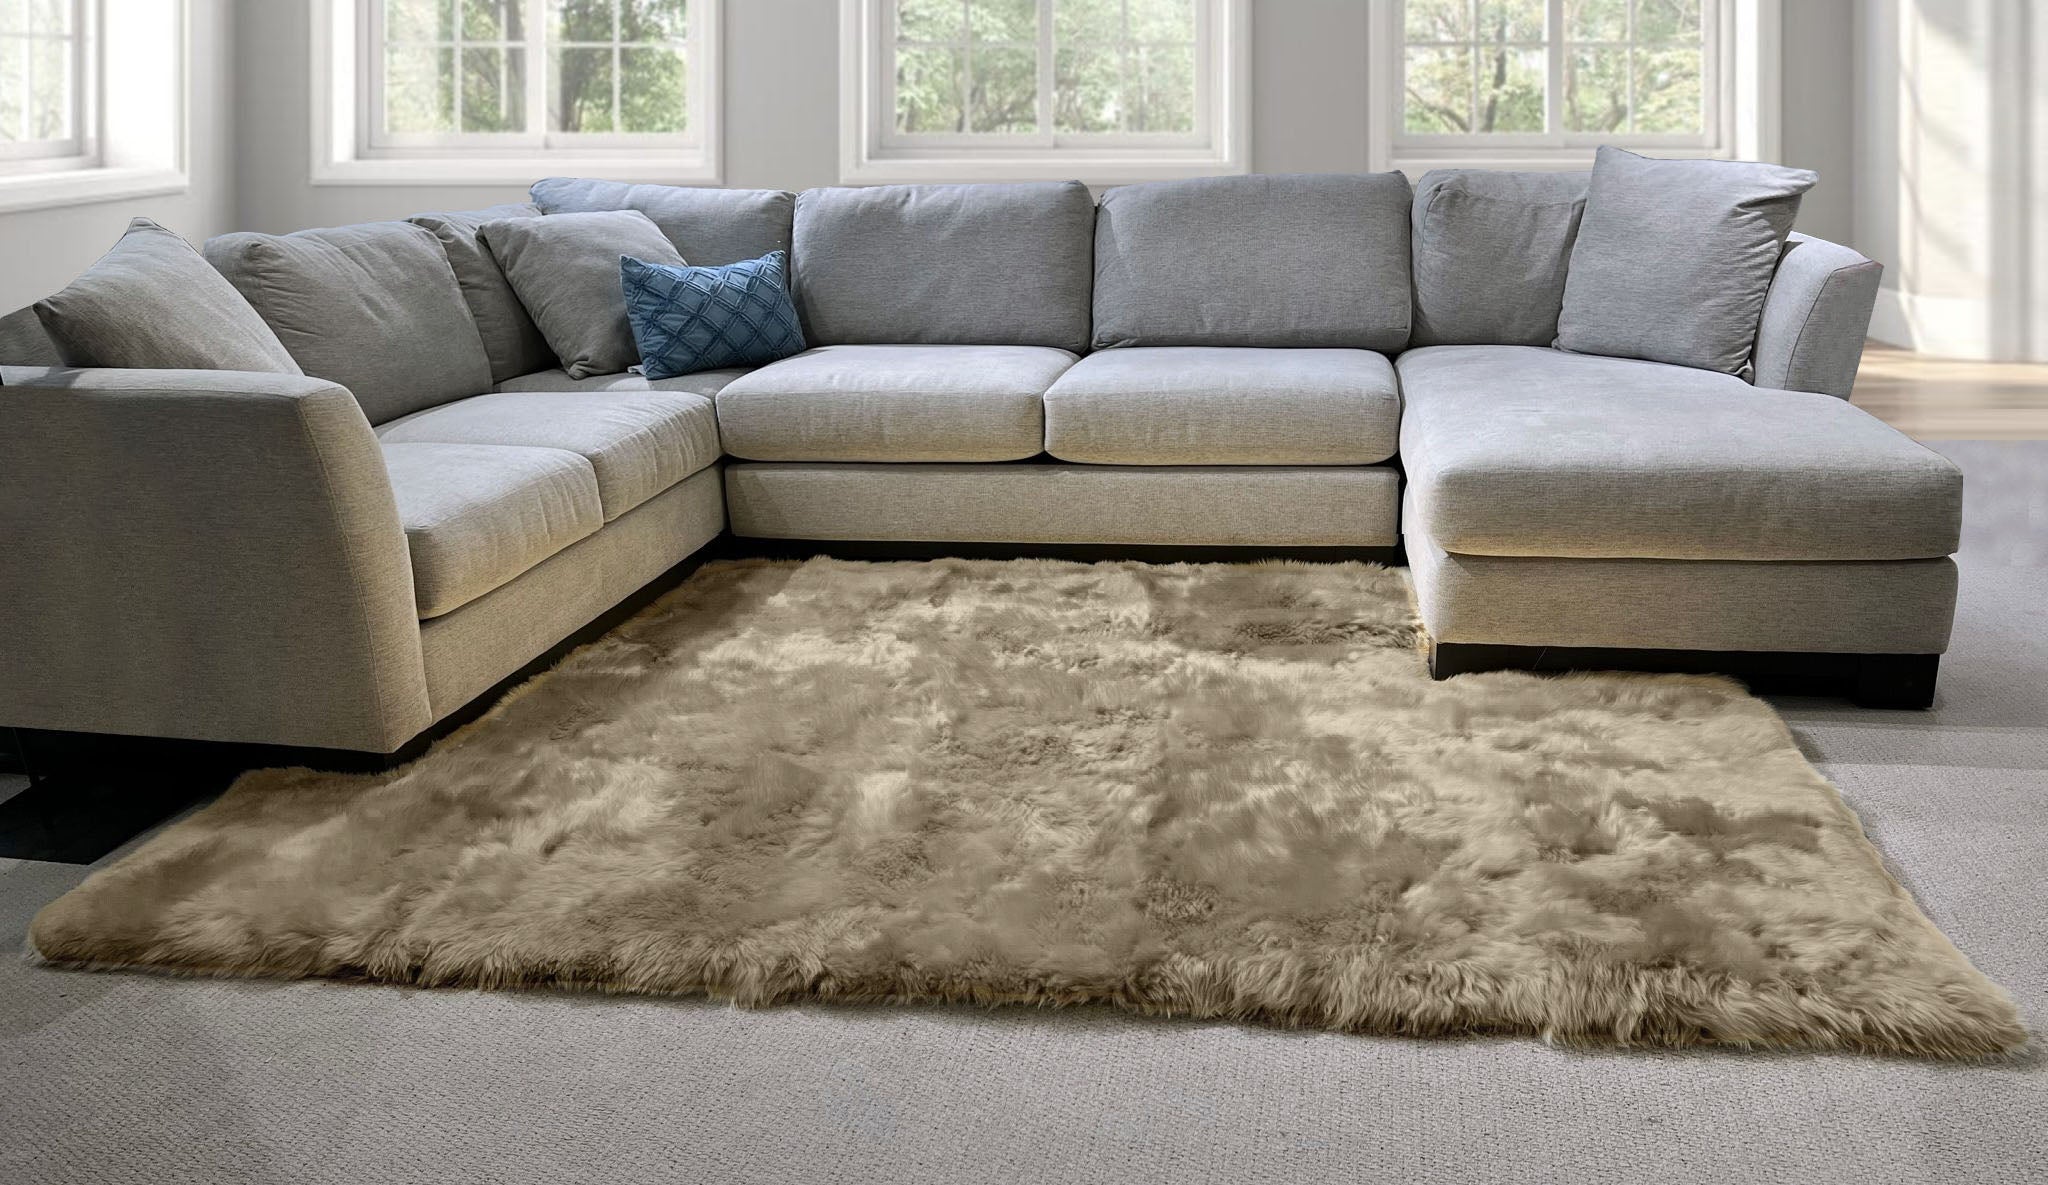 Taupe New Zealand Sheepskin Area Rug 6' x 8' by Hudson Hides